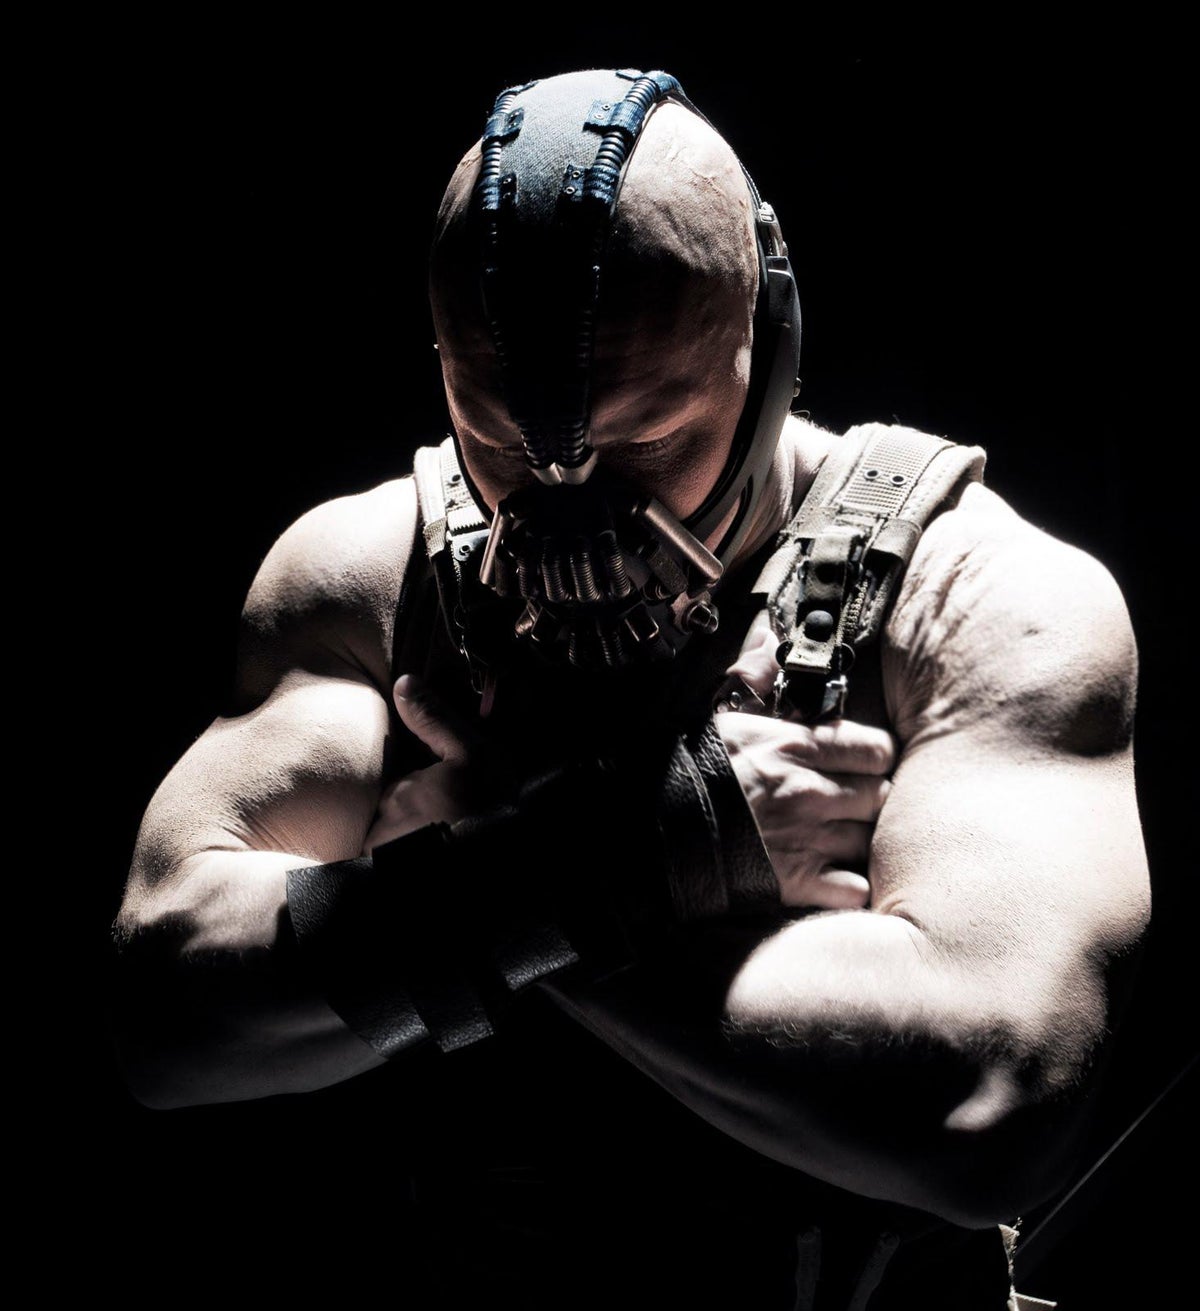 The Dark Rises' Bane Is Unintelligible on Twitter: You